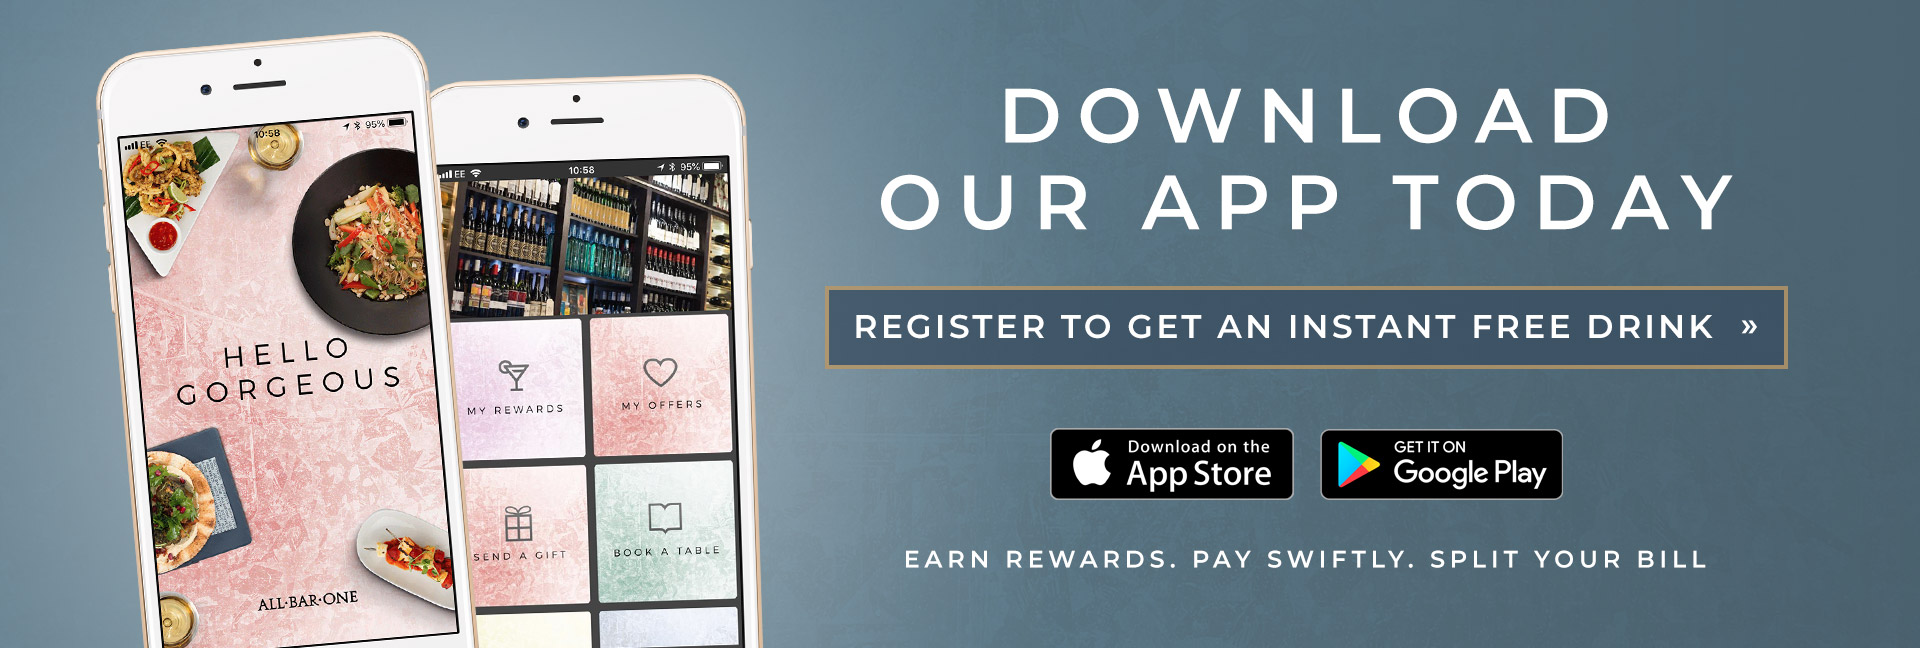 Download the All Bar One App today